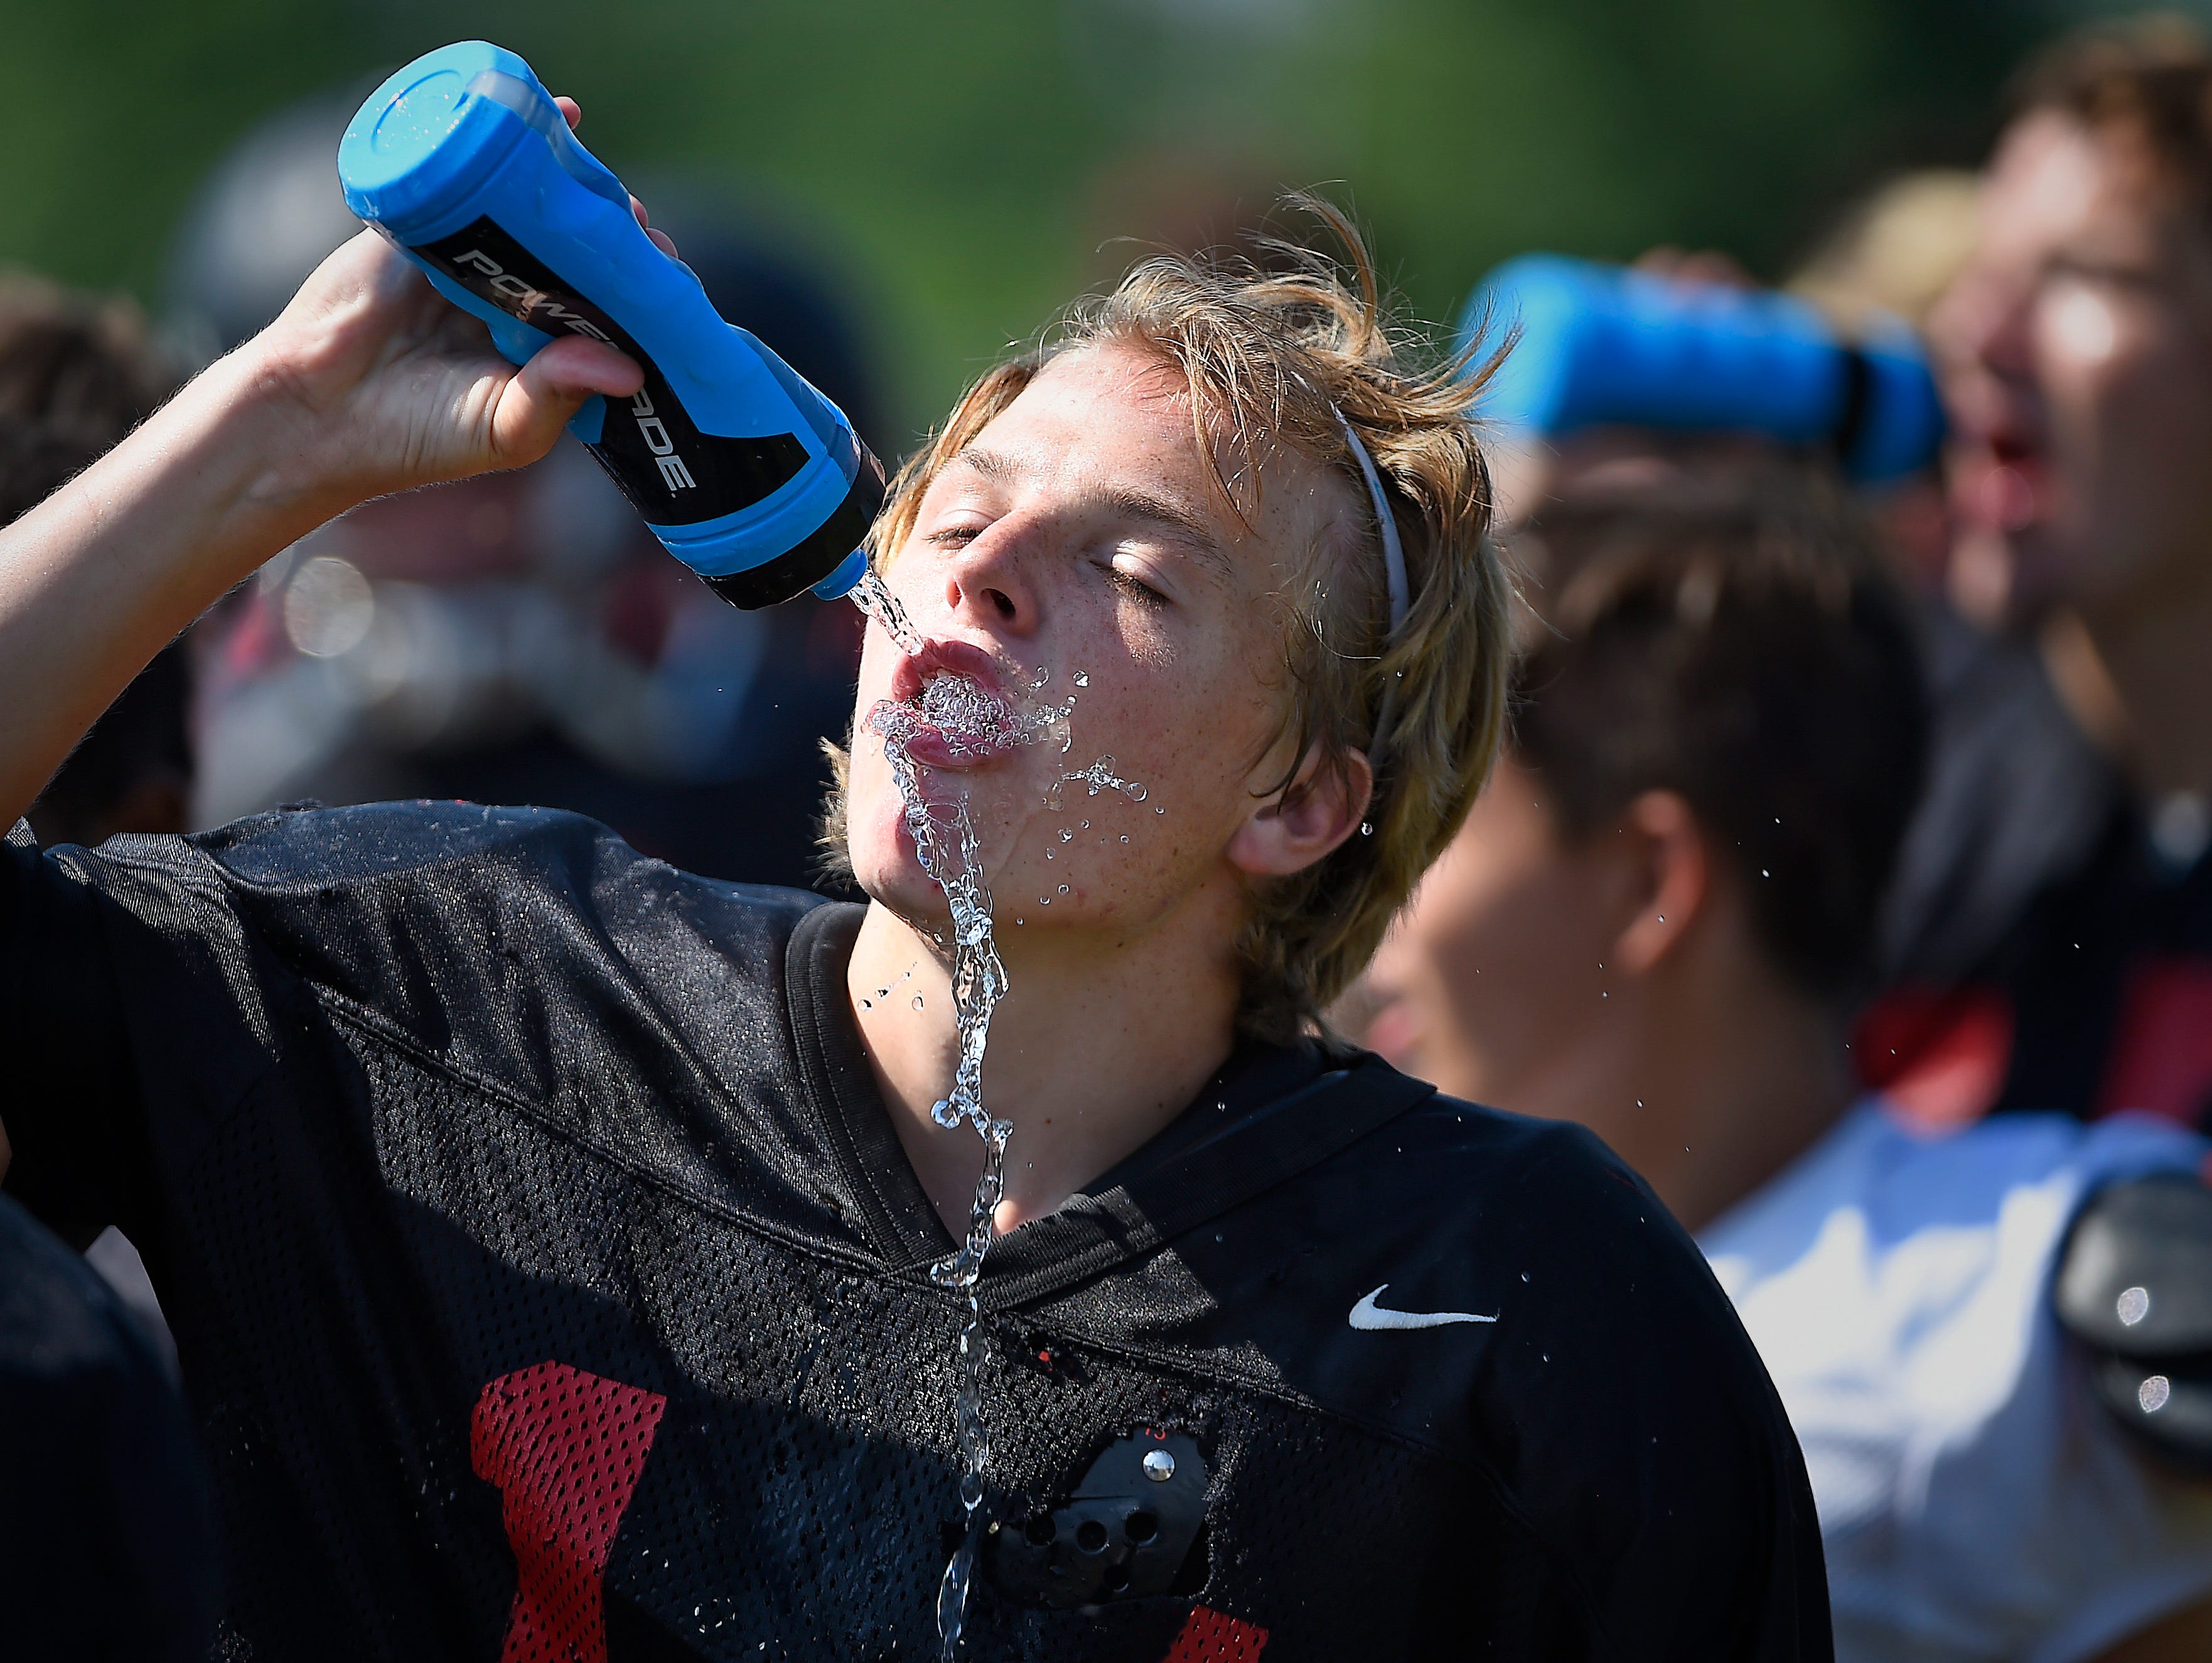 Nick Stallcup stays hydrated to beat the heat Monday during a brief break in practice. Ravenwood joined with other high school football teams across the Midstate on the first day of practice in full pads.